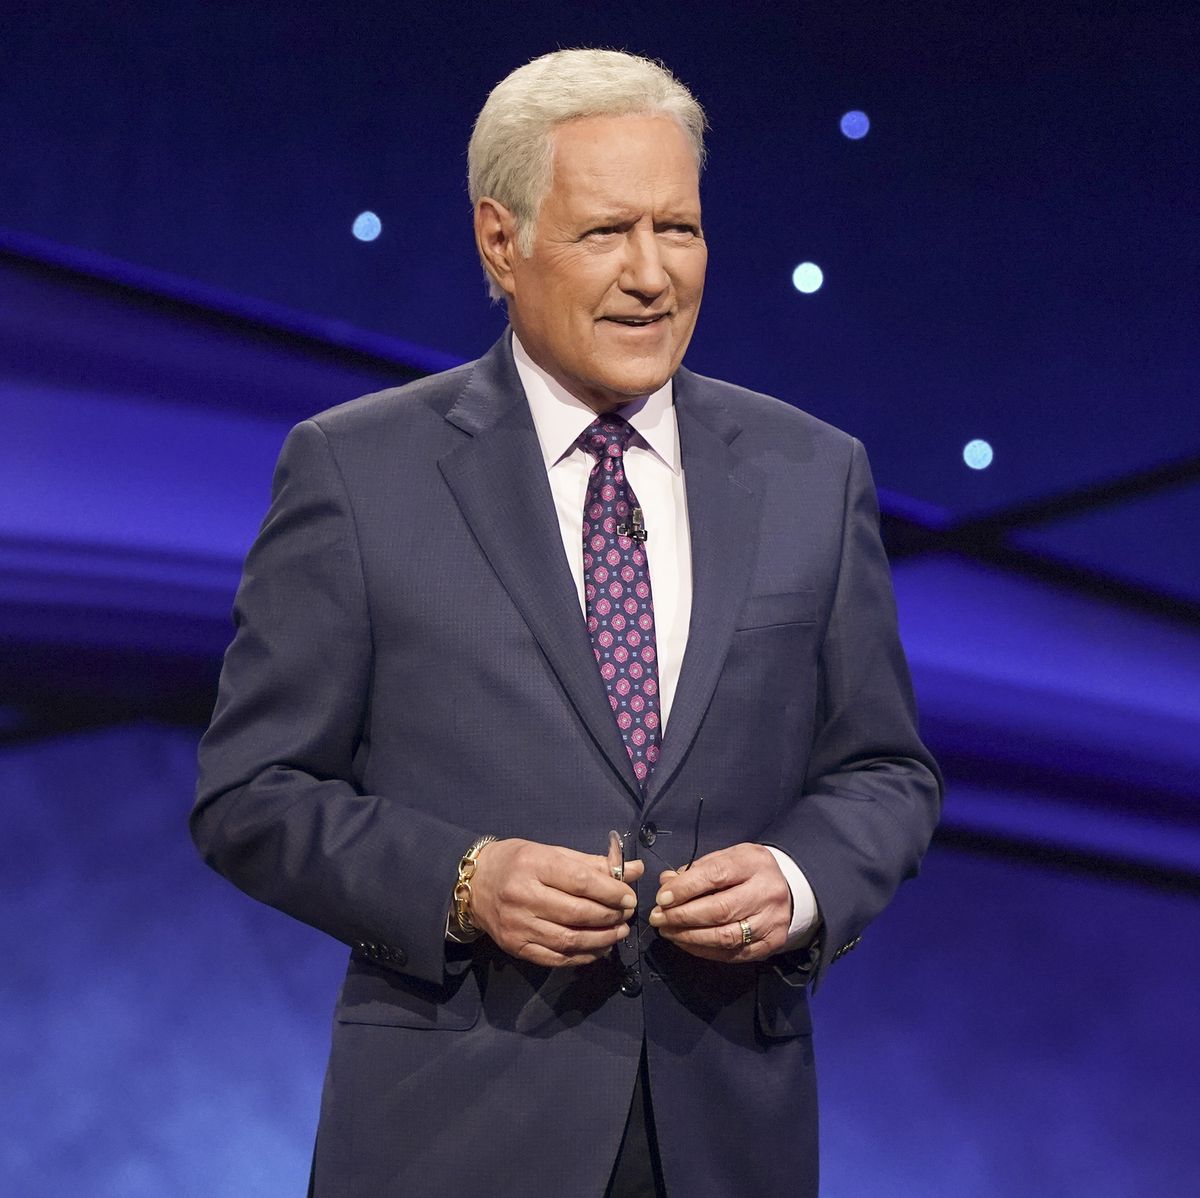 jeopardy the greatest of all time   on the heels of the iconic tournament of champions, jeopardy is coming to abc in a multiple consecutive night event with jeopardy the greatest of all time, premiering tuesday, jan 7 800 900 pm est, on abc  eric mccandlessabc via getty images
alex trebek